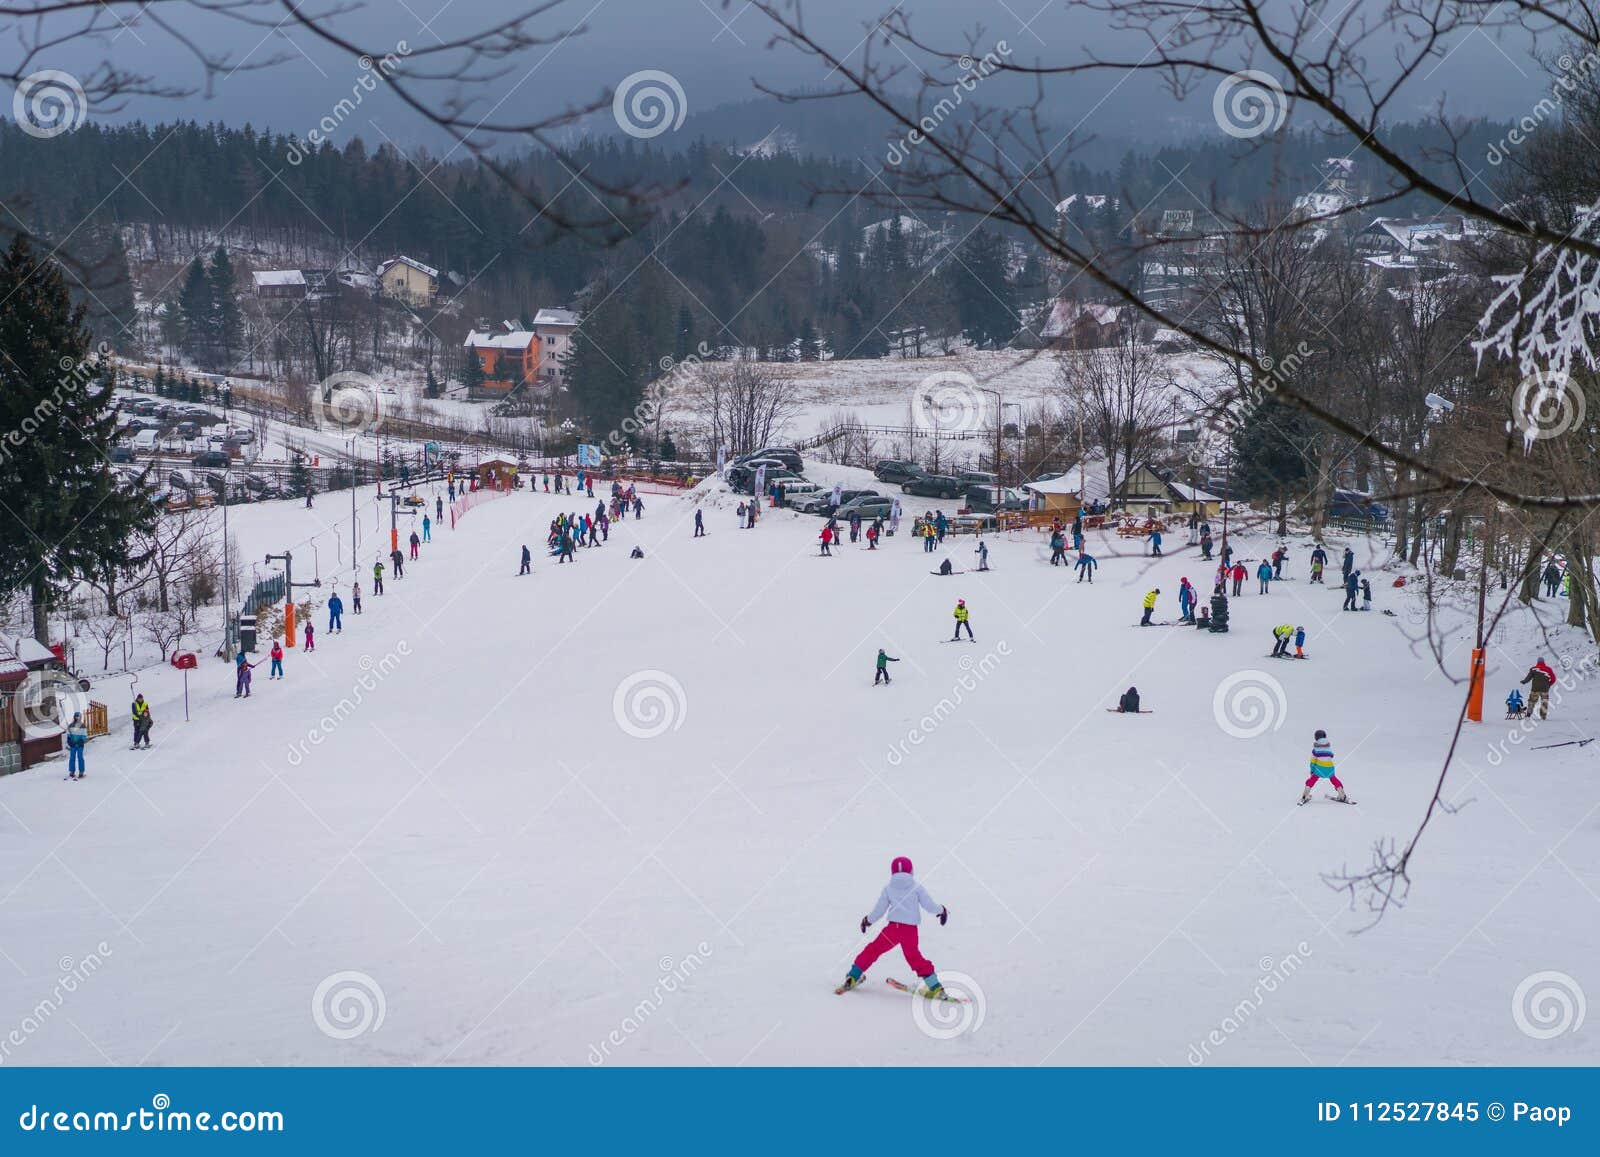 Skiing on the Small Slope in Karpacz Editorial Image - Image of leisure ...